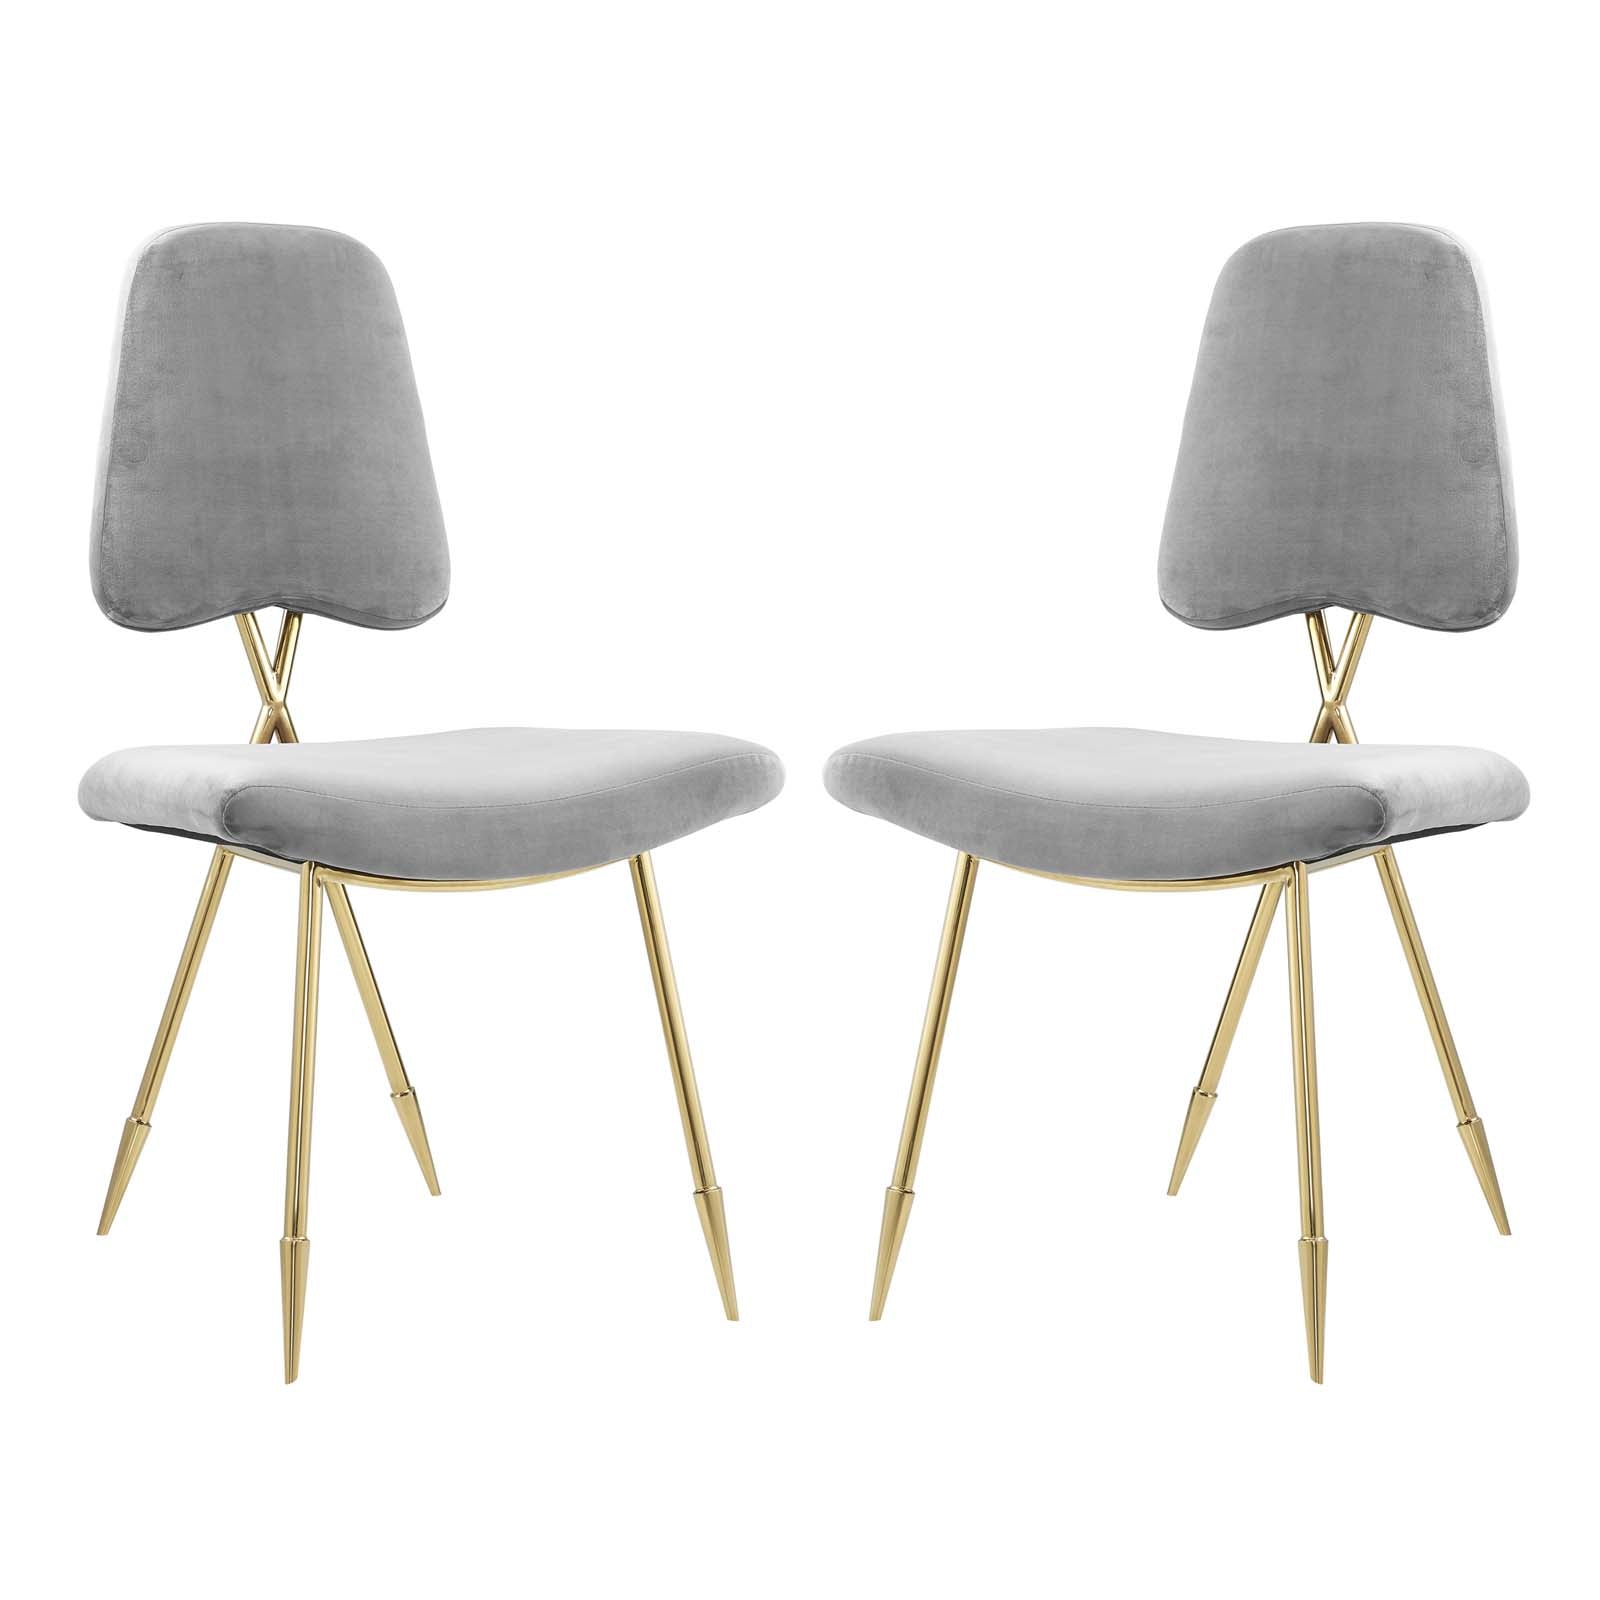 Ponder Dining Side Chair Set of 2 - East Shore Modern Home Furnishings